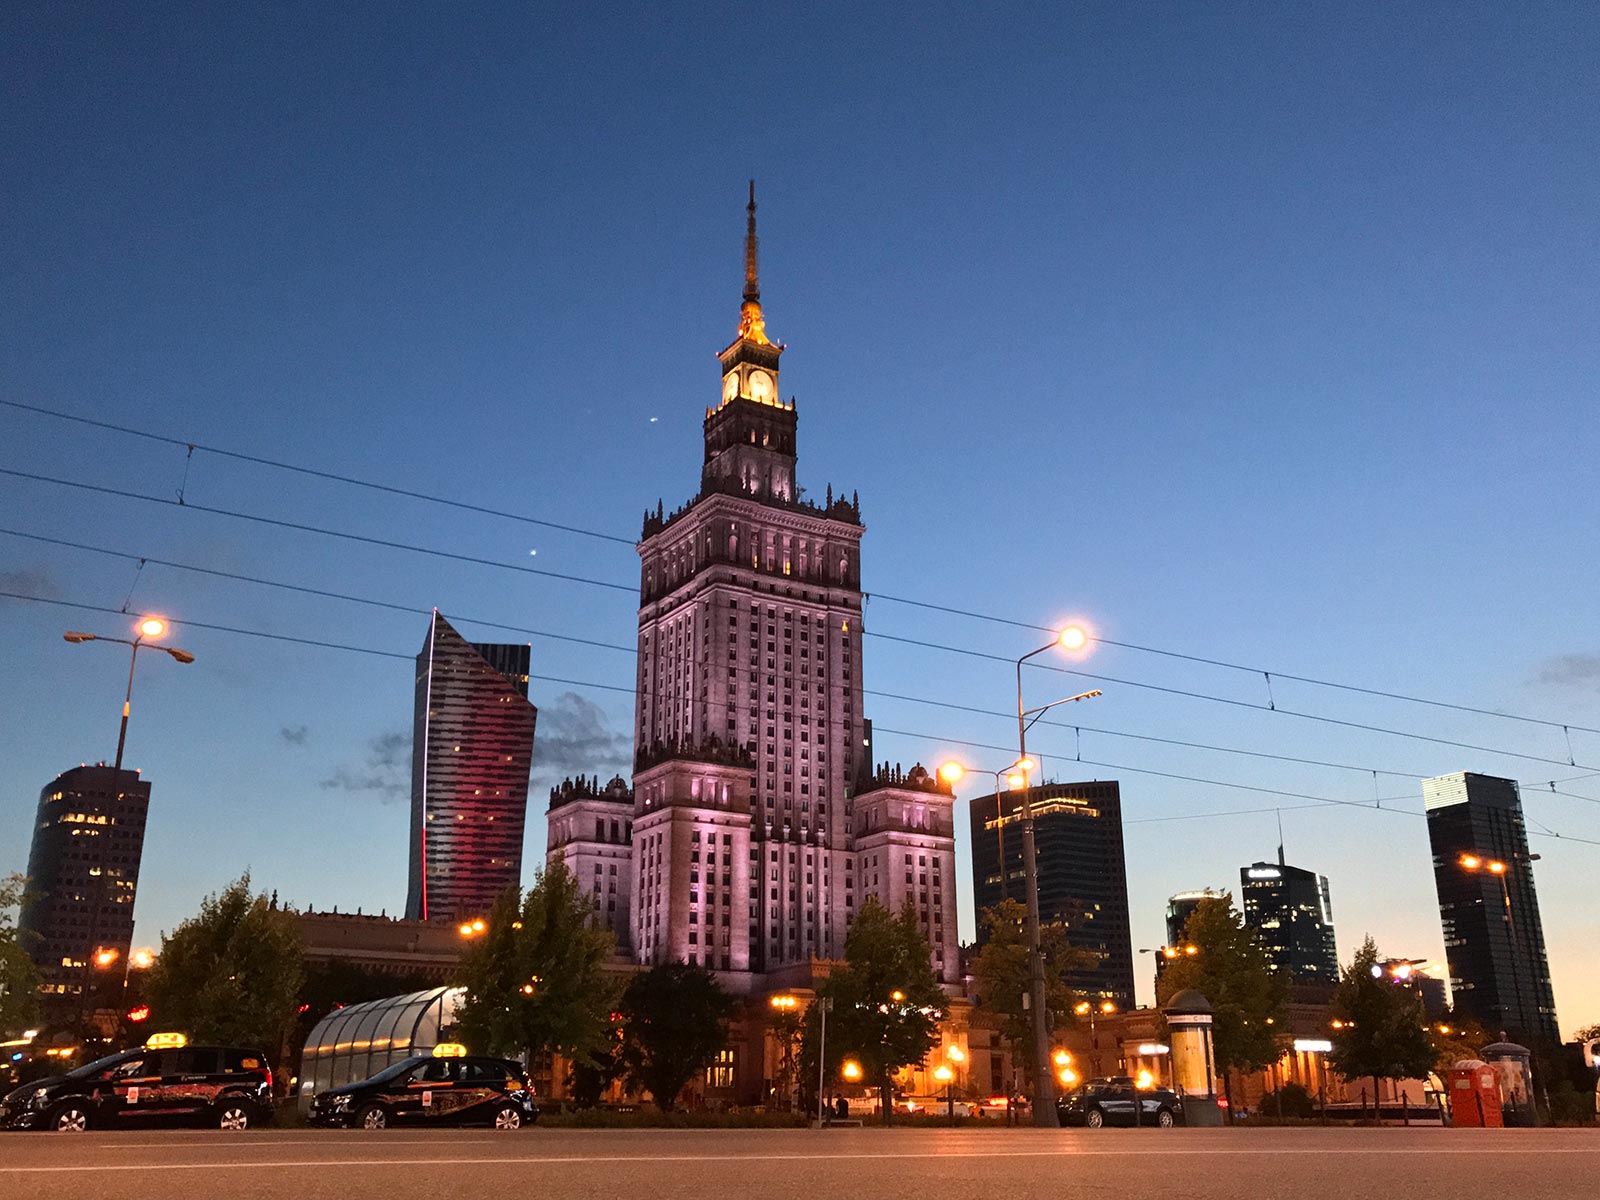 Palace of Culture and Science Building in Warsaw, Poland. Minsk & Warsaw